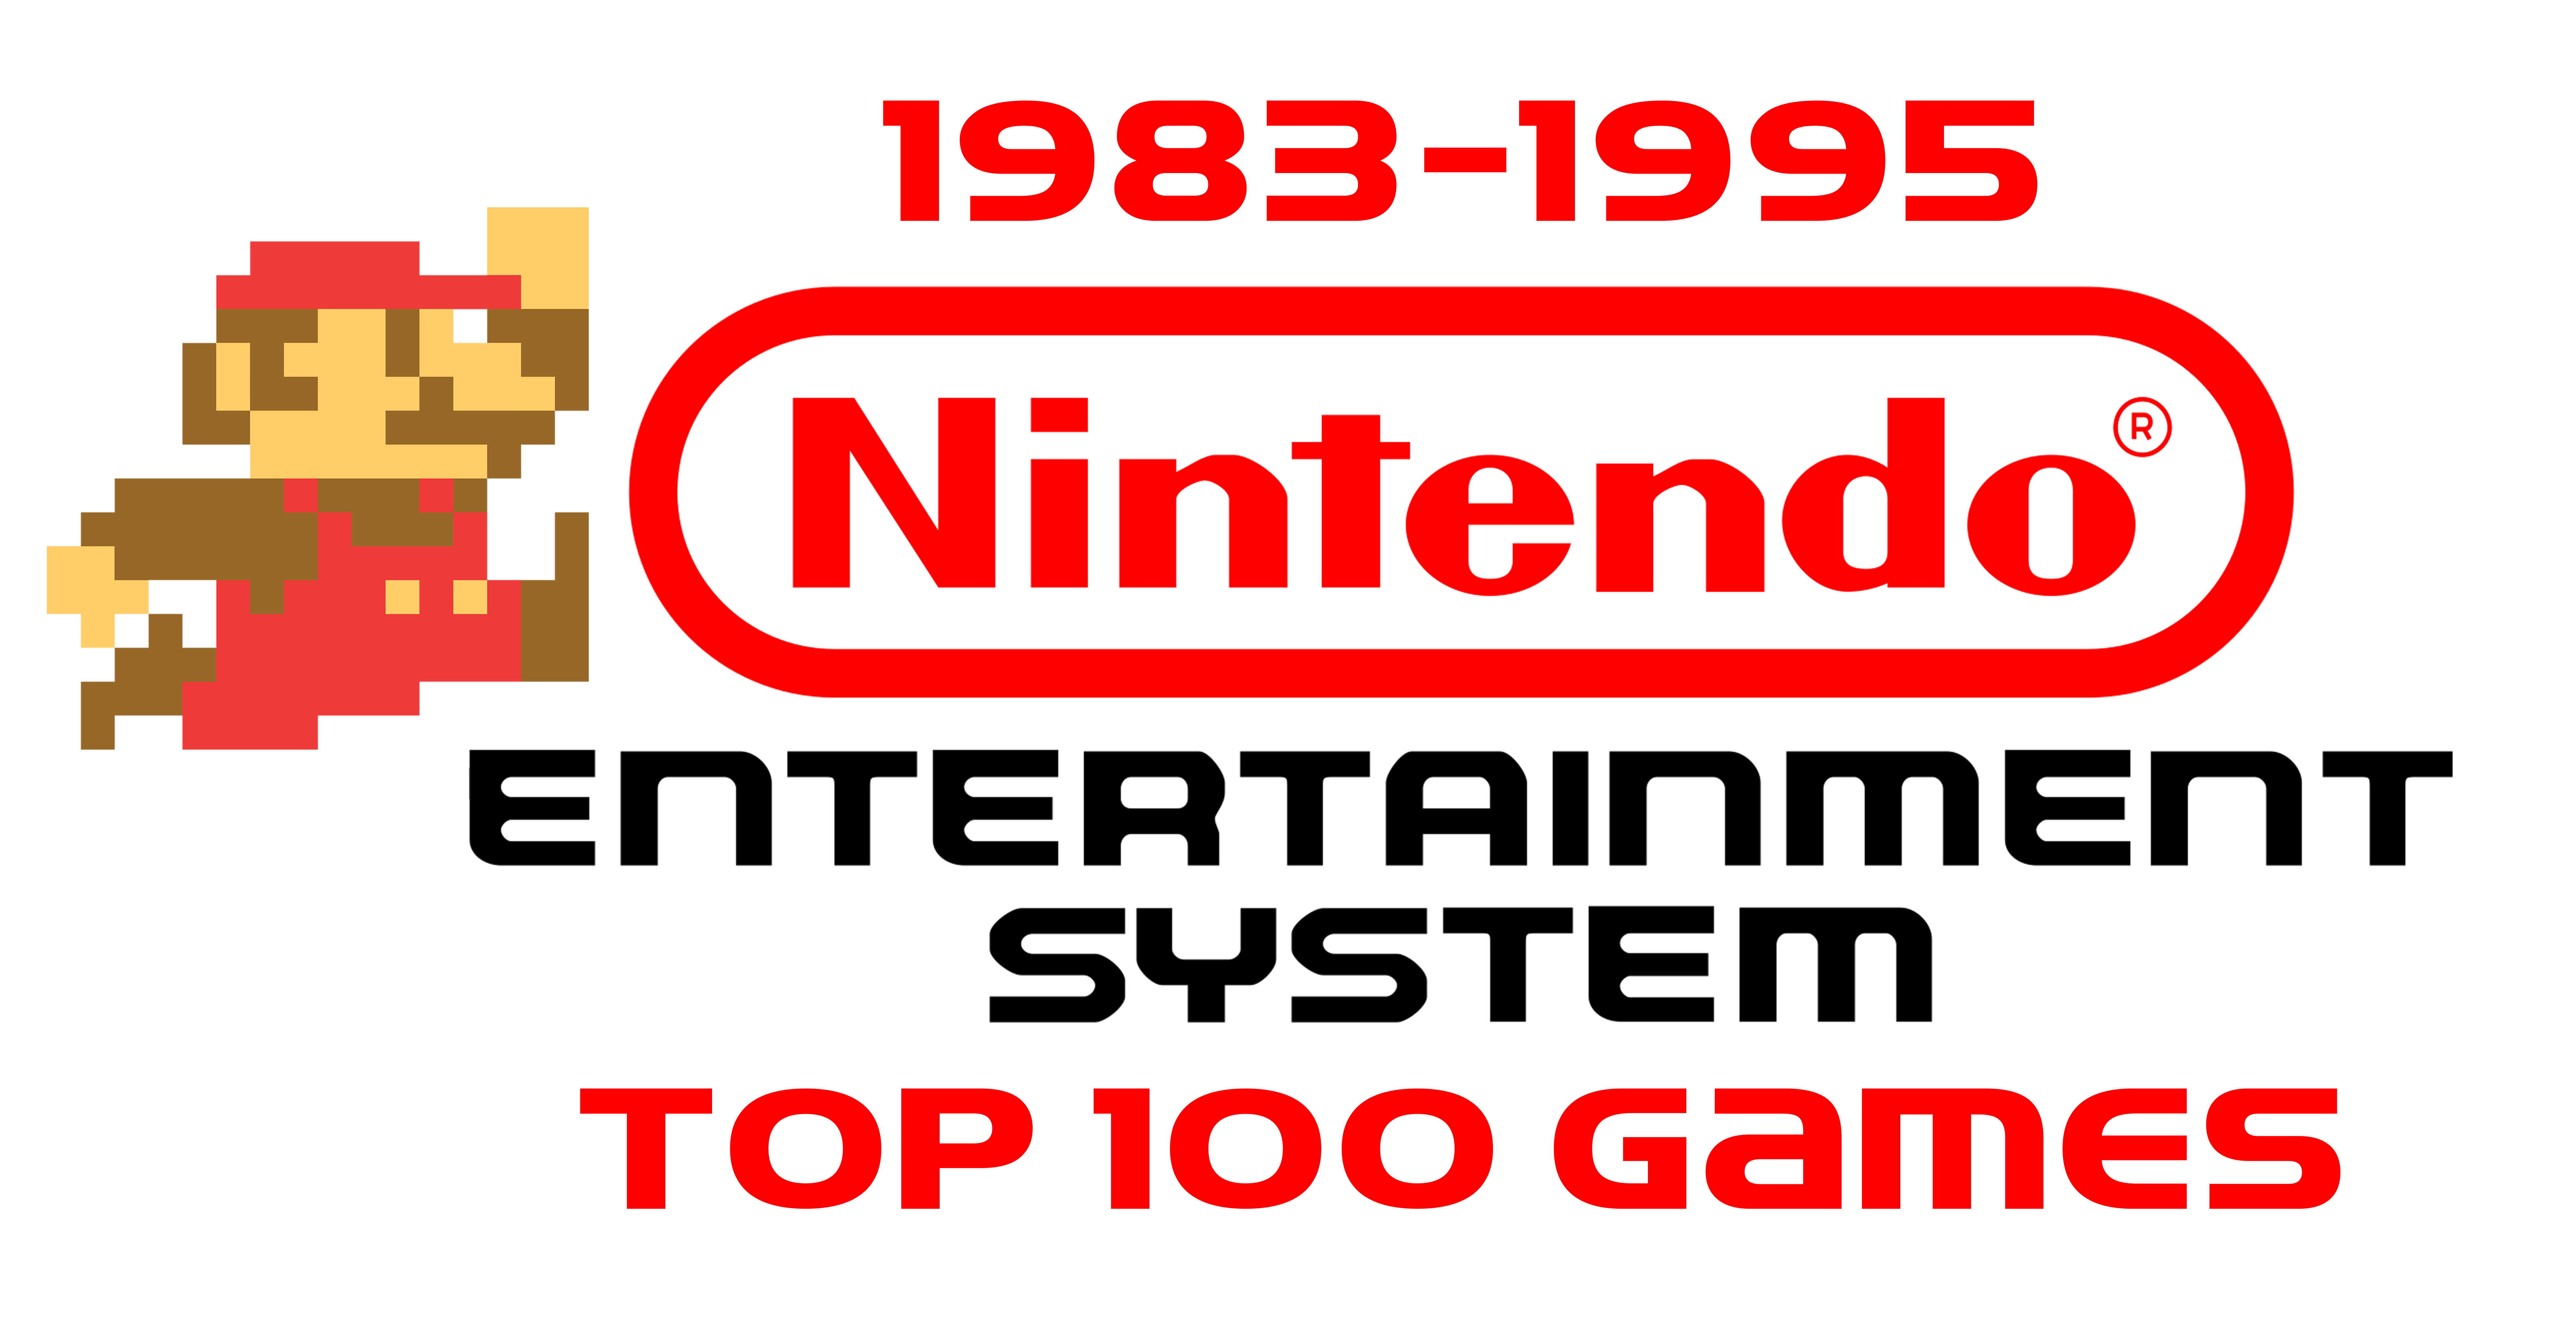 More information about "The Best of Nintendo - A combination of playlist and theme"